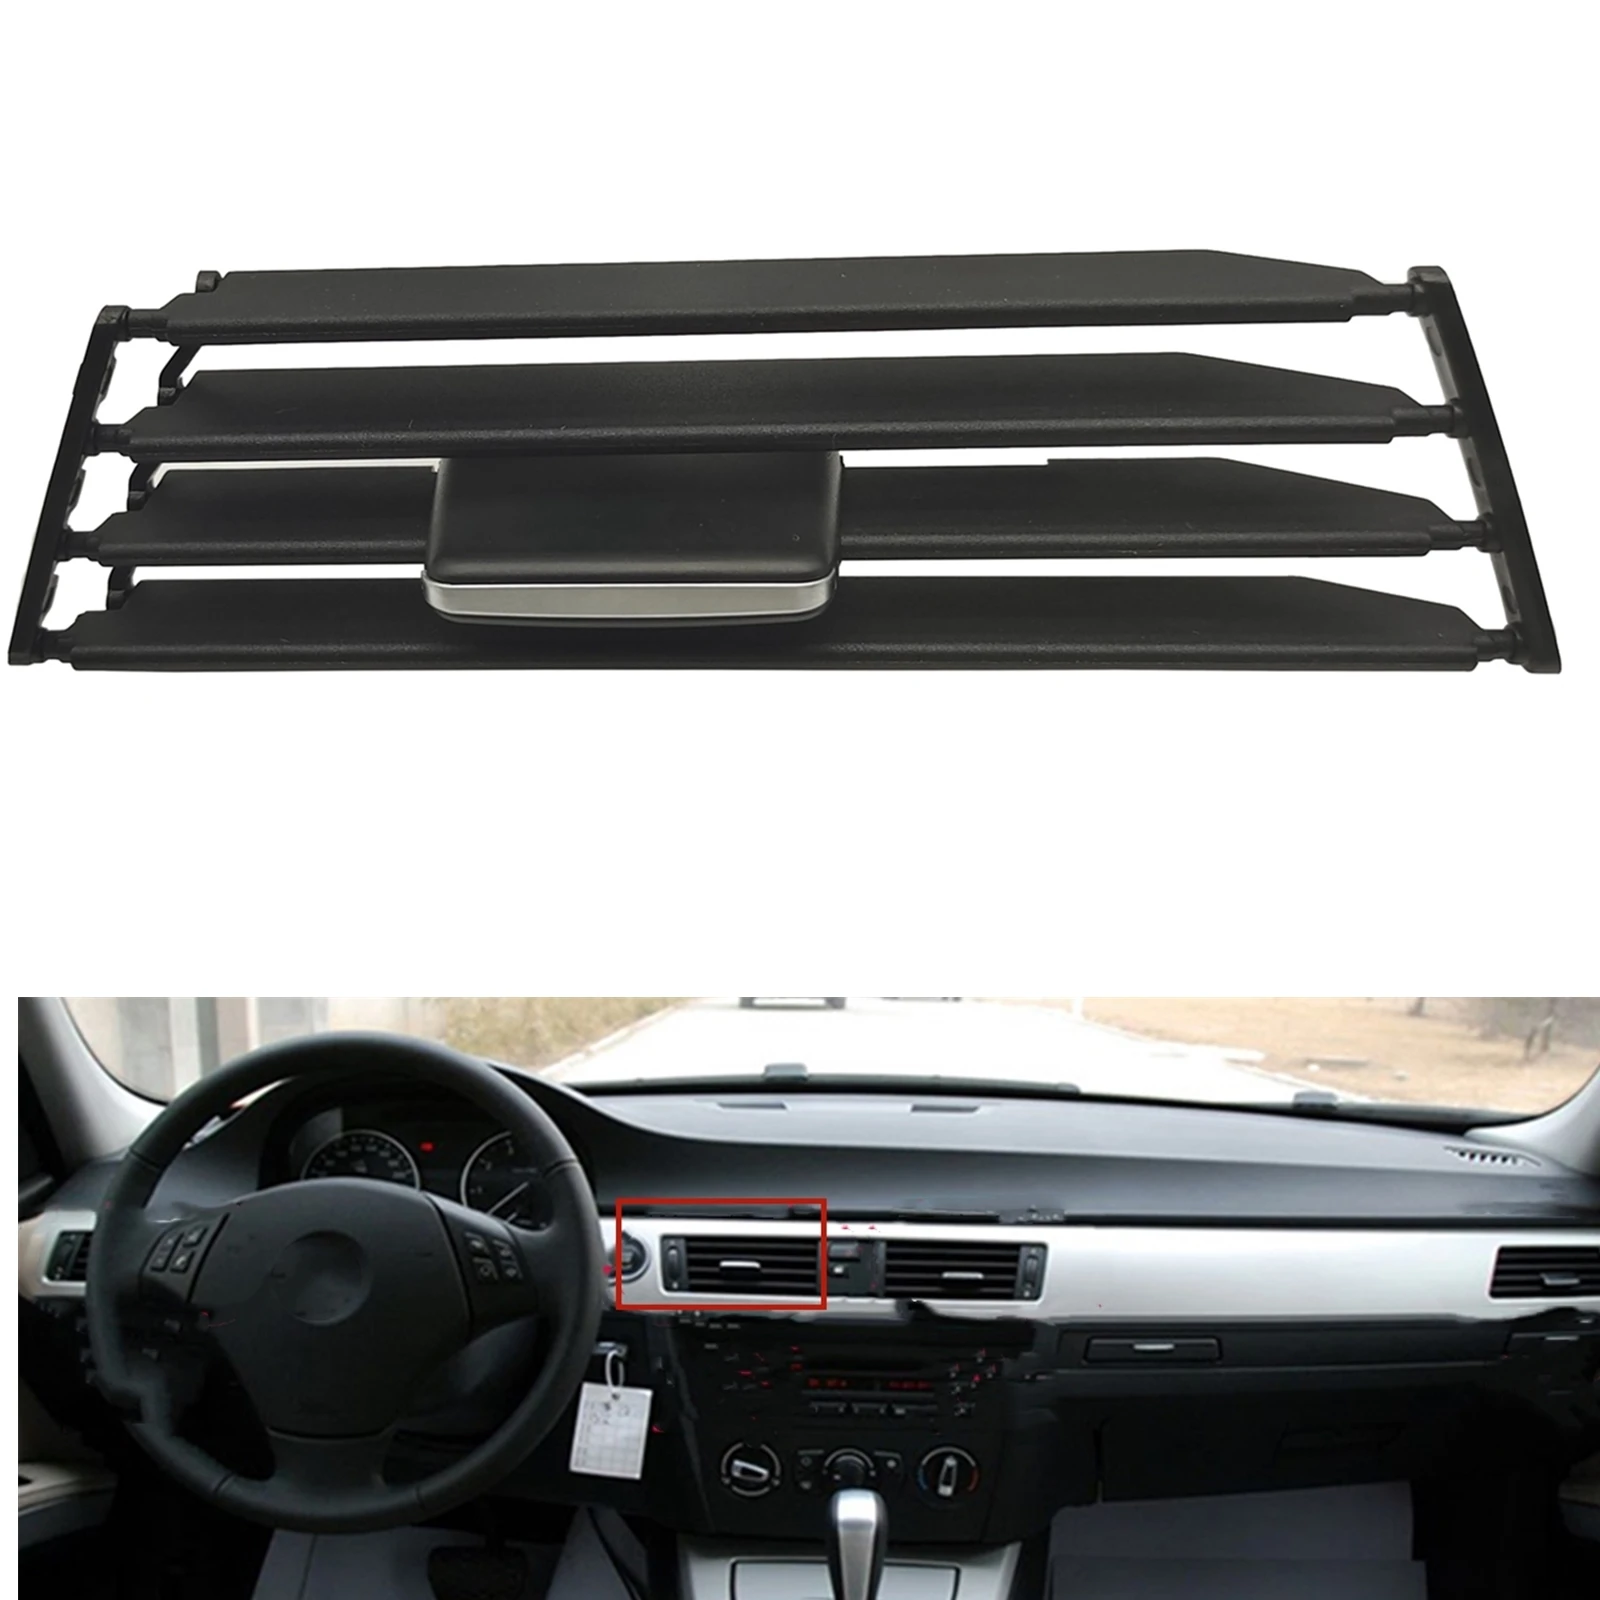 

For BMW E90 E91 E92 E93 3-Series M3 2005-2012 Right/Left Conditioning Duct Grill Trim Center Console A/C Air Vent Grille Outlet